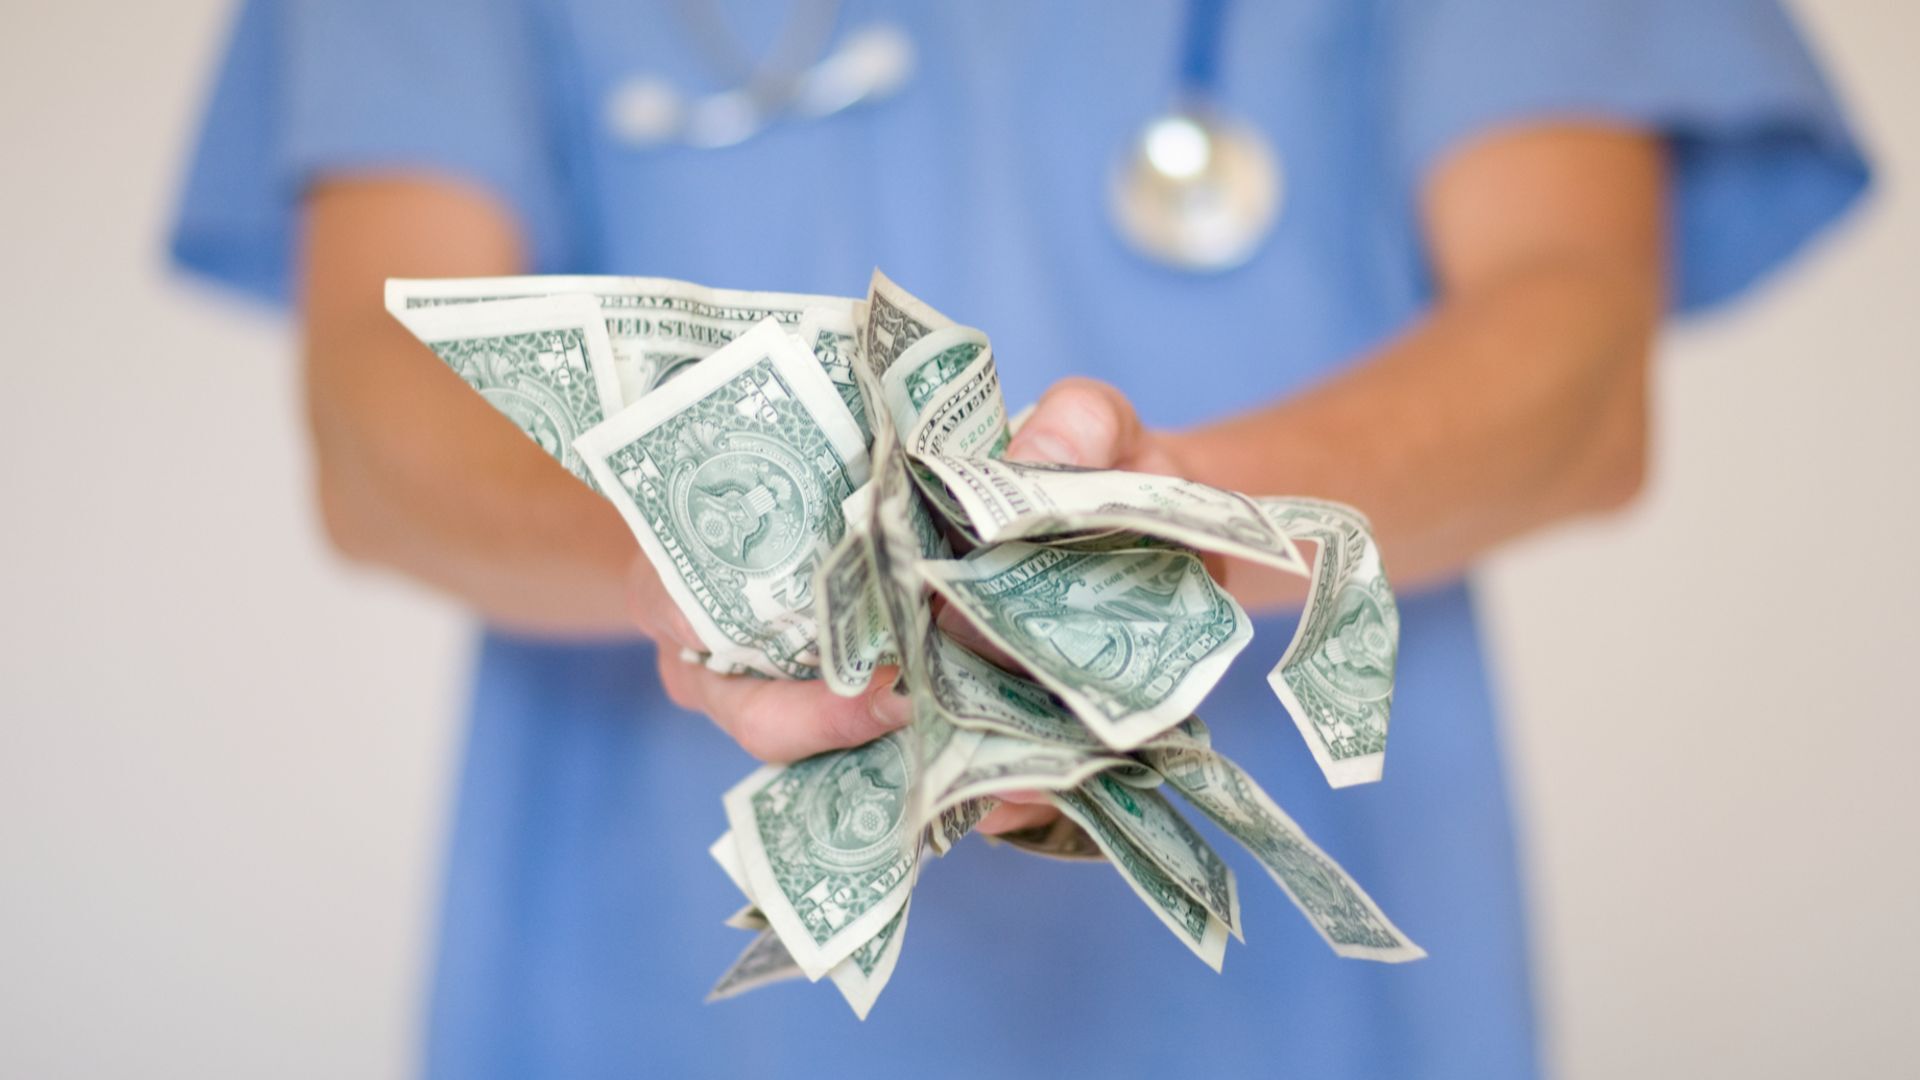 Could the California health care minimum wage increase be delayed? Budget deficit and financial challenges raise concerns.